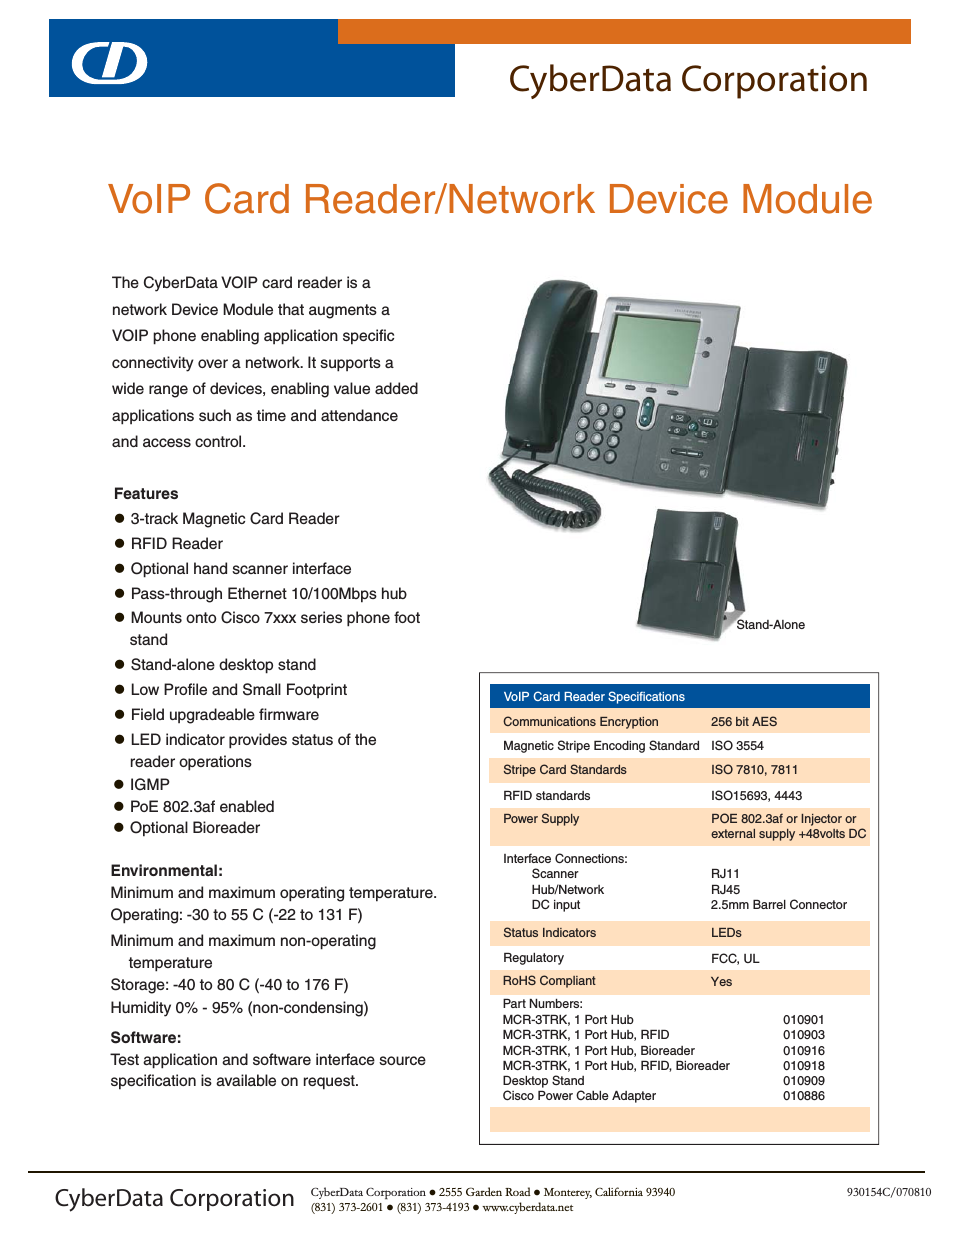 VoIP Card Reader/Network Device Module